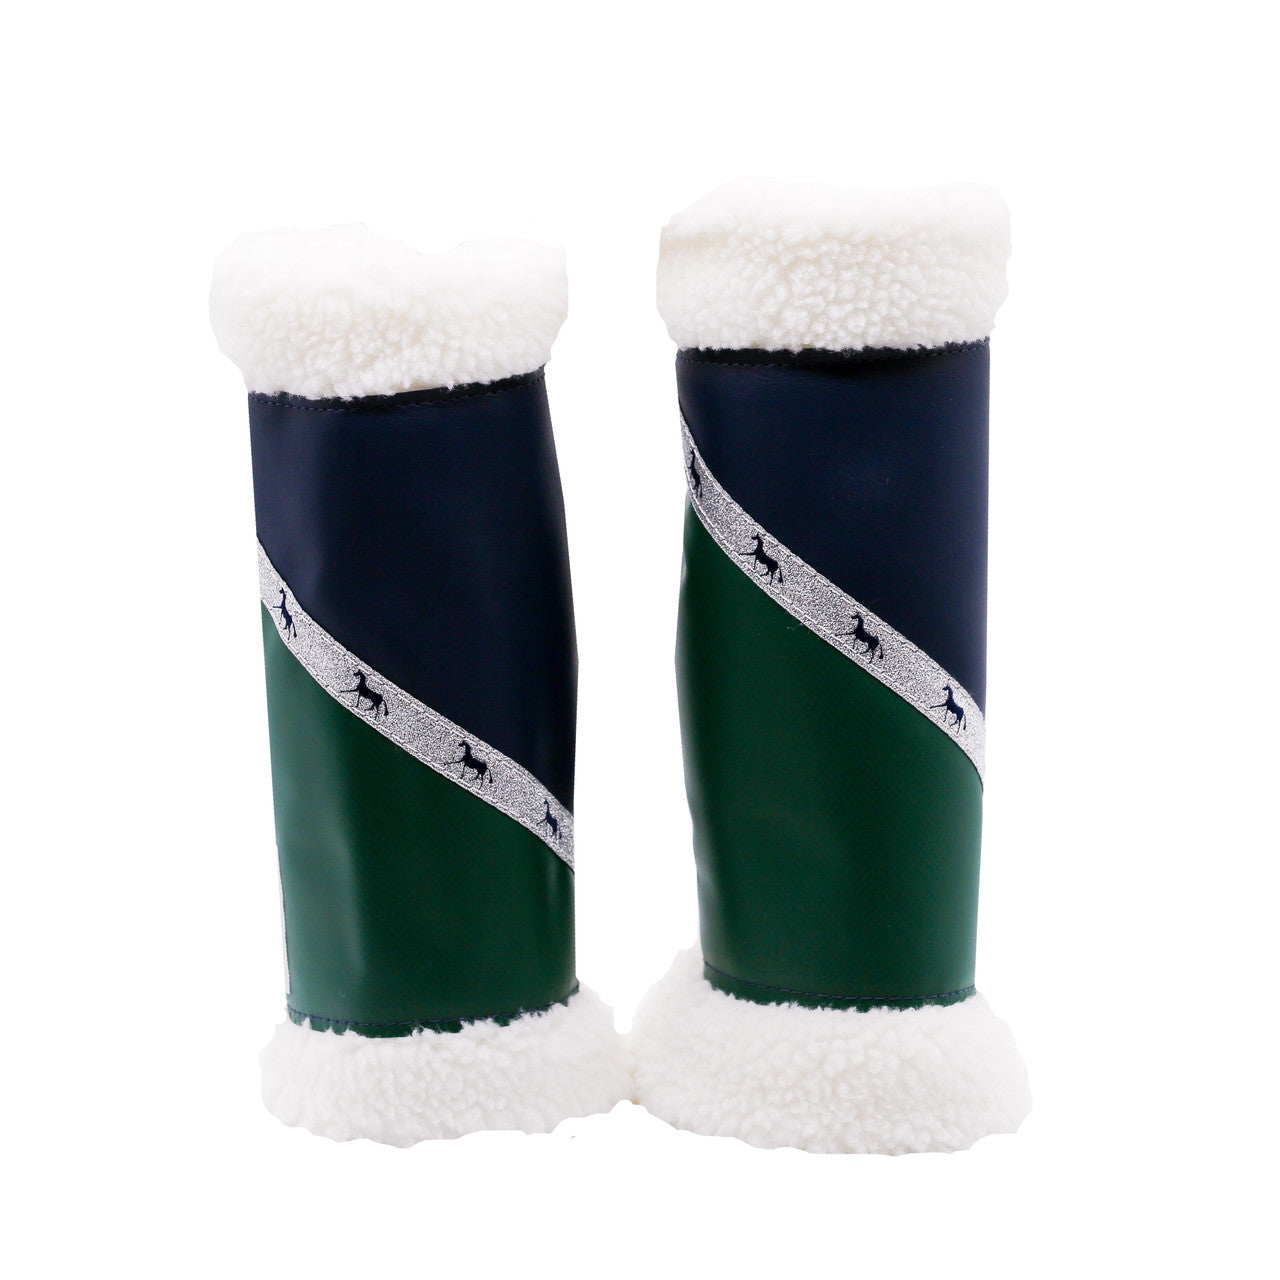 Sherpa Boots - Navy & Green - Pair -  Made to order.